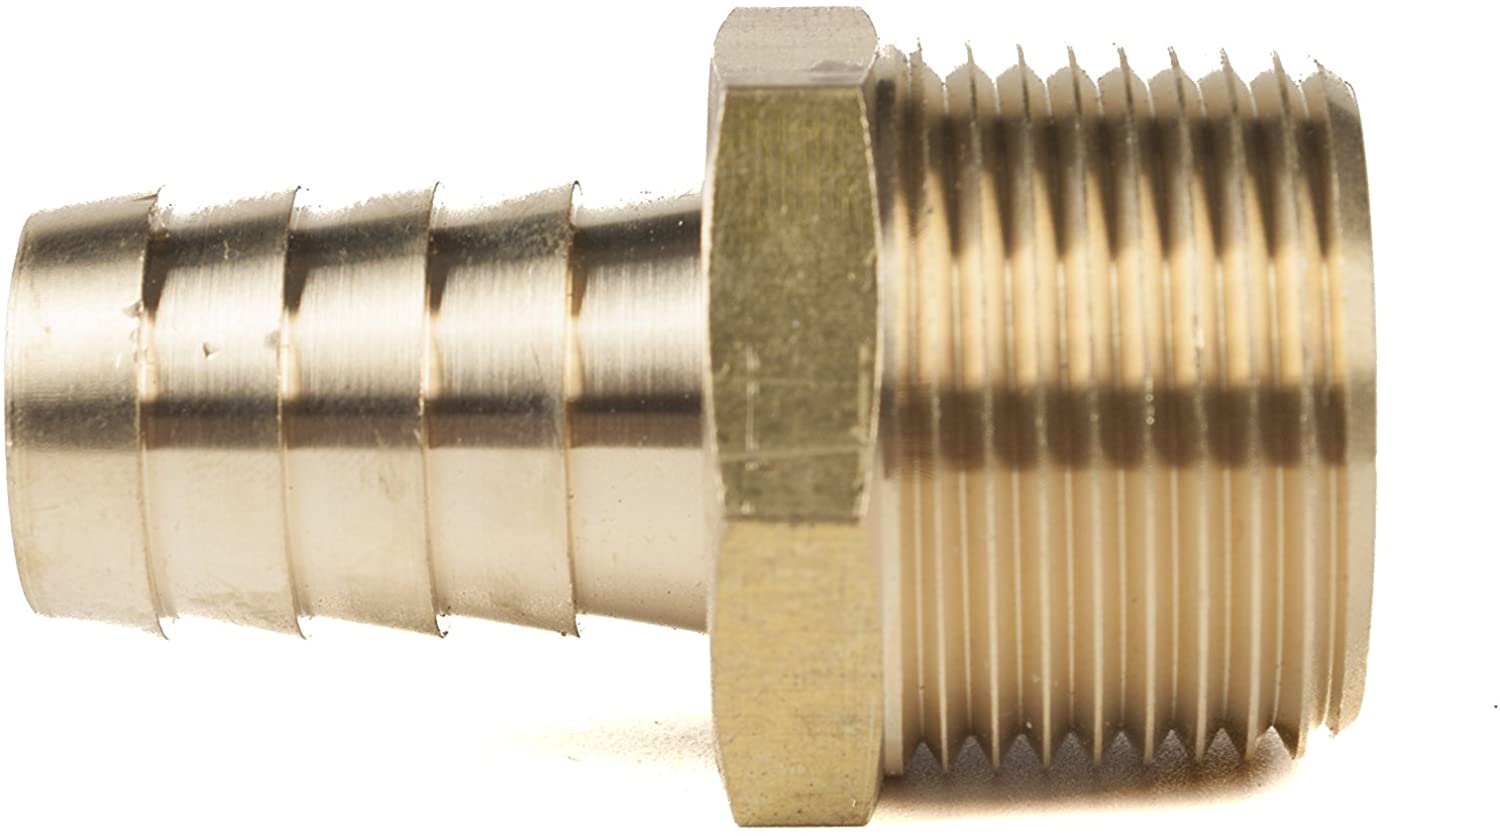 LTWFITTING Brass Barb Fitting Coupler/Connector 5/8-Inch Hose ID x 3/4-Inch Male NPT(Pack of 5)